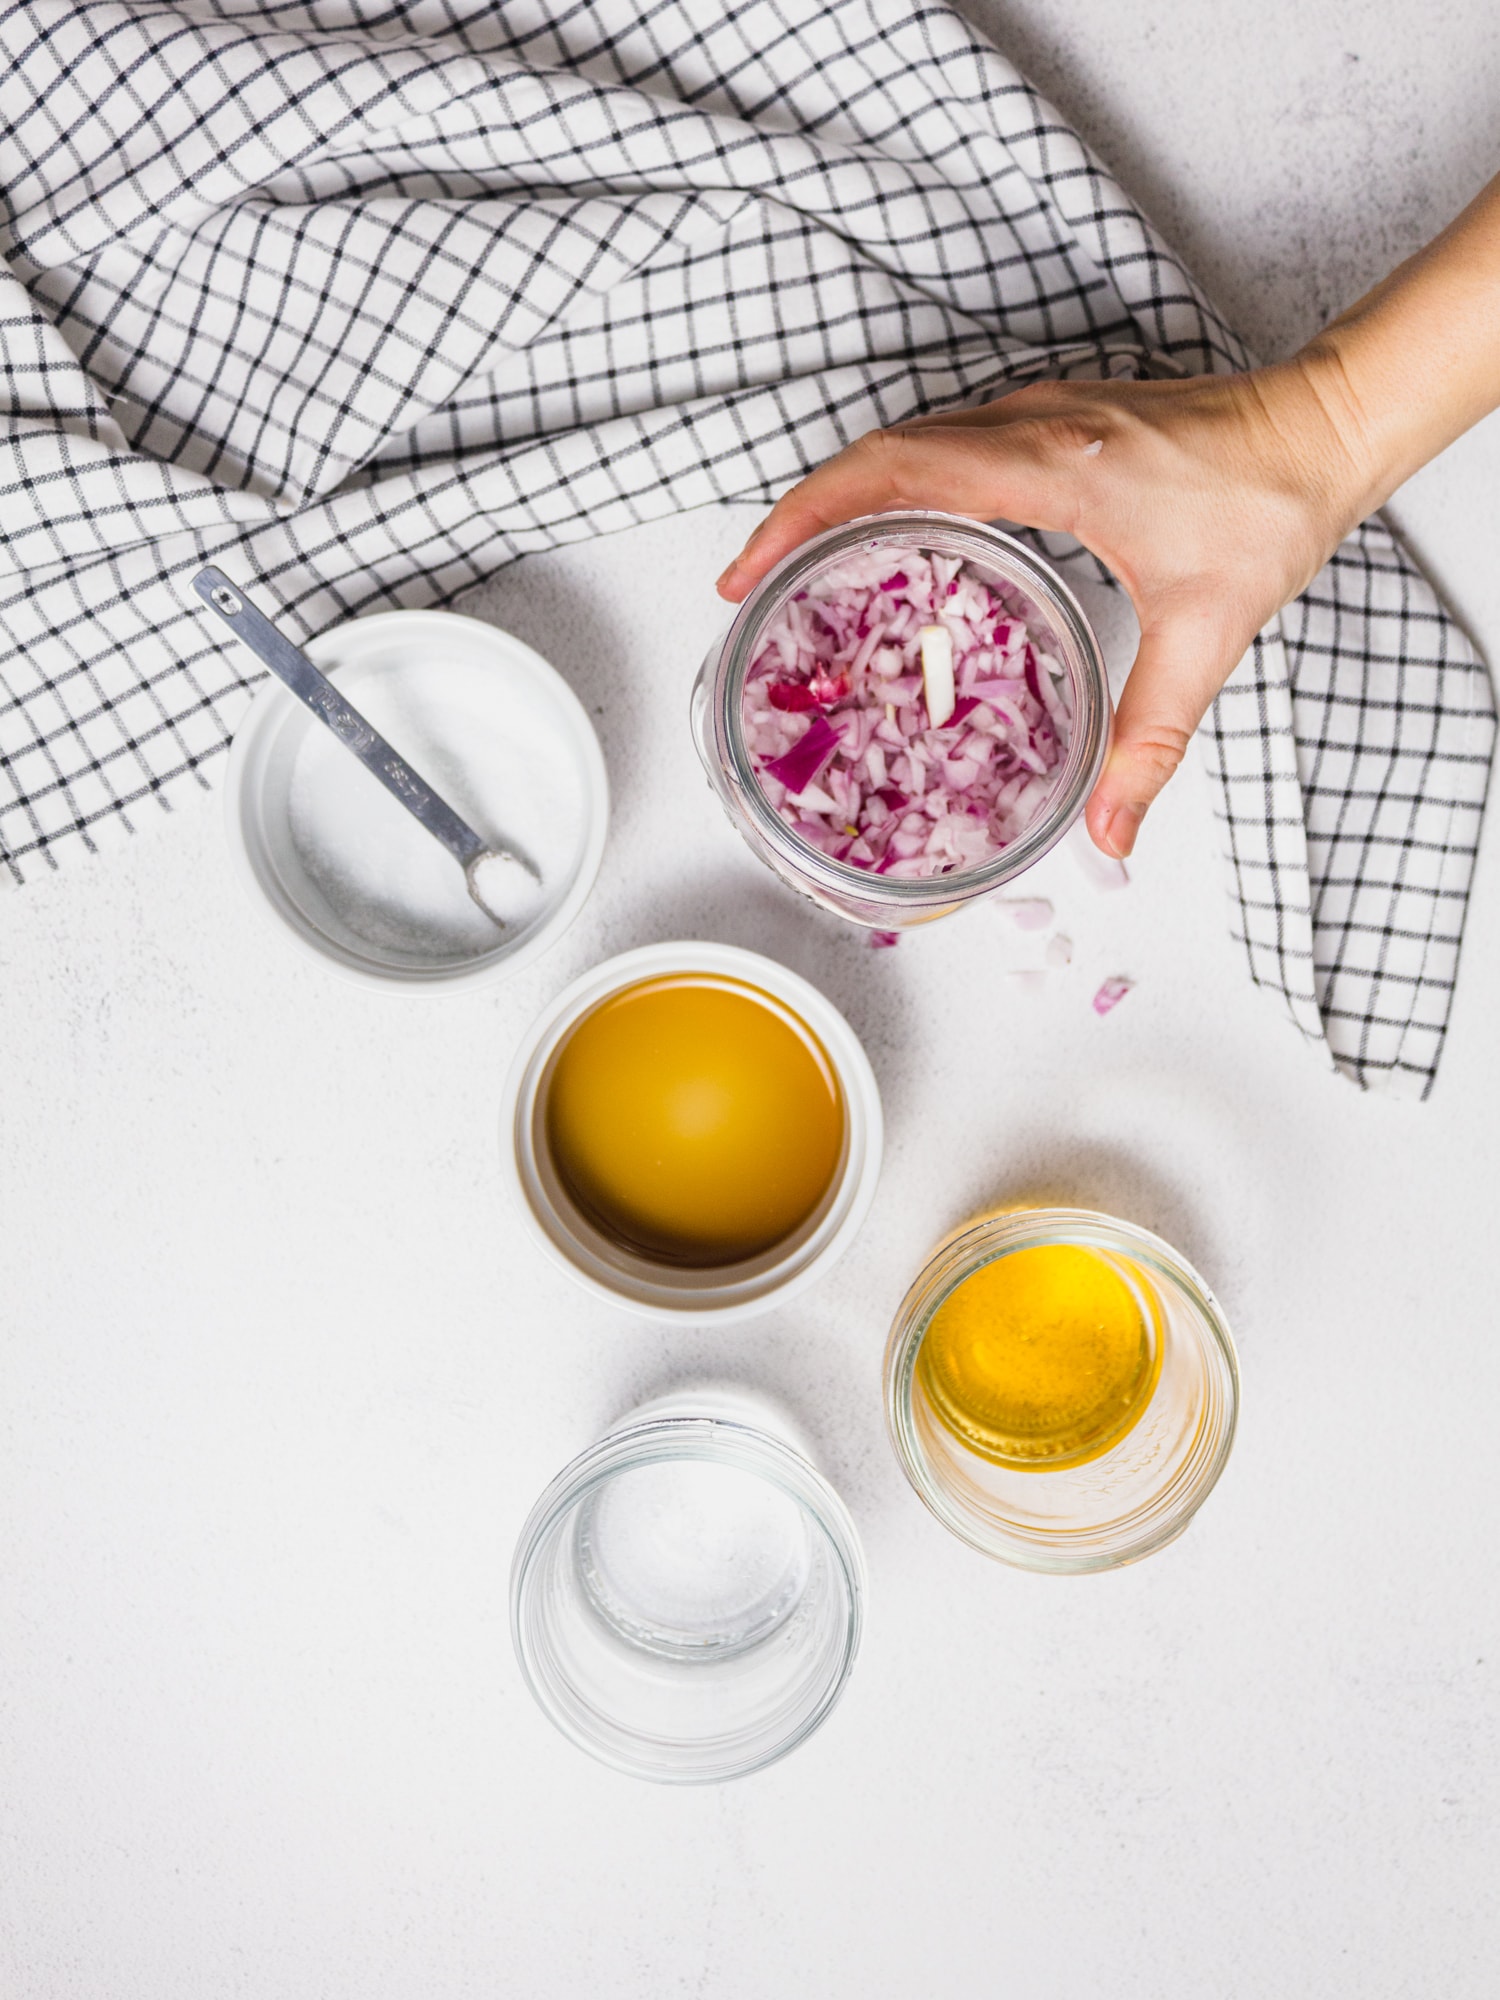 Ingredients needed to make quick pickled red onions. Onions, maple syrup, water, salt and apple cider vinegar are in bowls on a white table. A black and white table cloth is there for decoration.